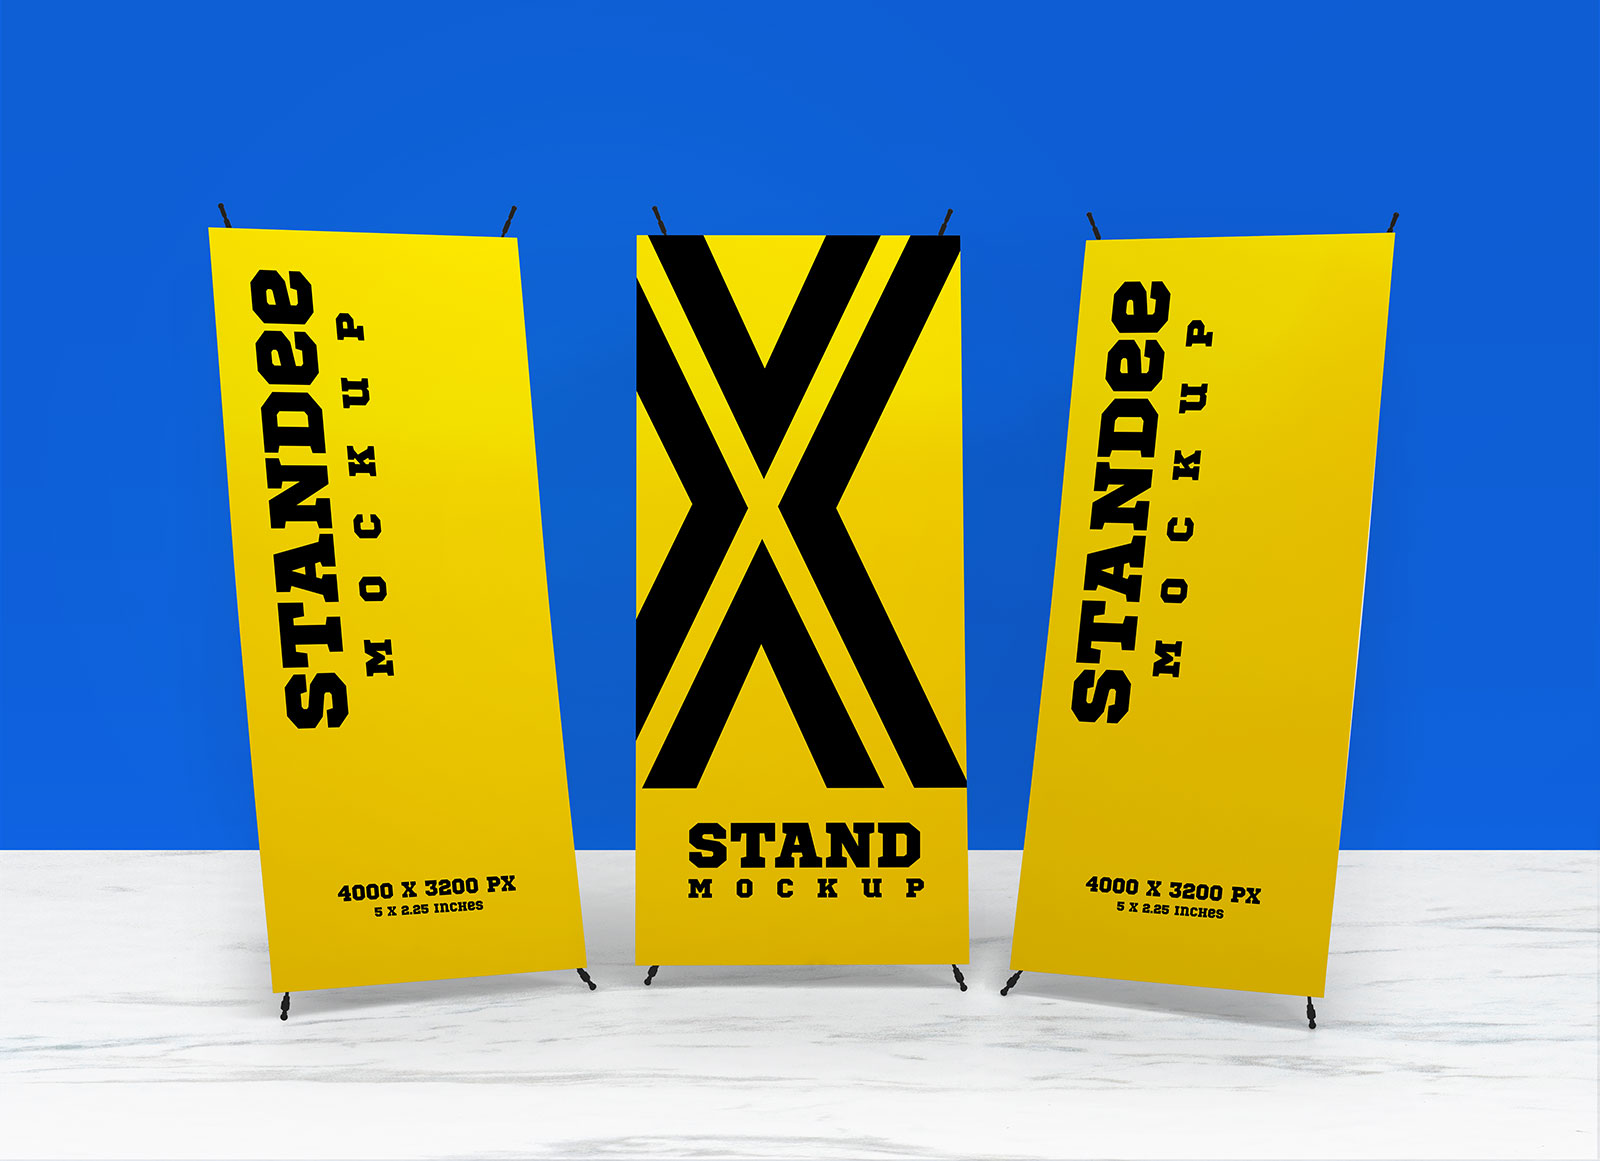 X-Stand Bannerモックアップセット